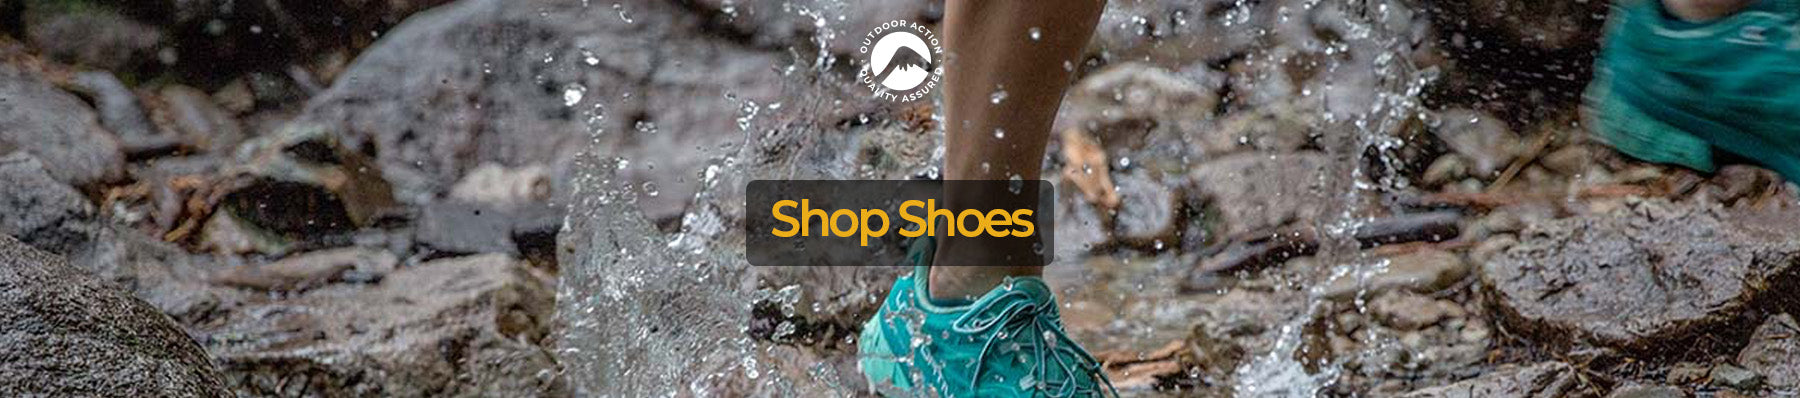 Shop Shoes online at Outdoor Action